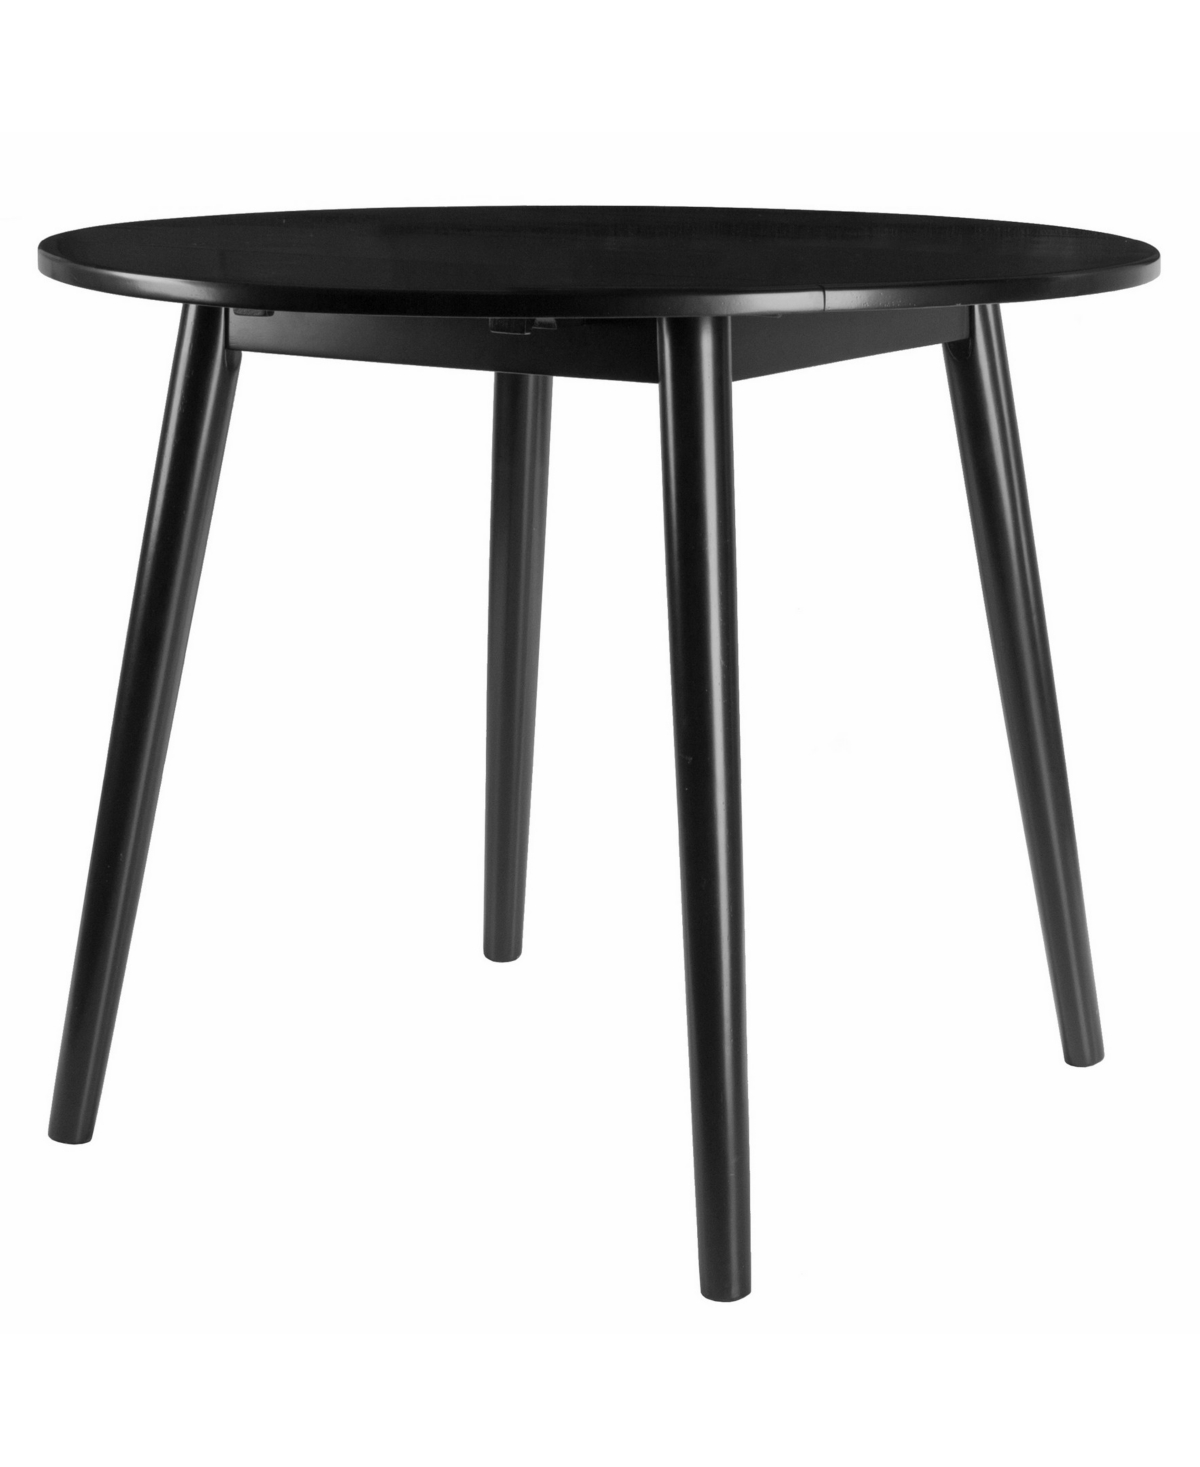 Winsome Moreno 28.94" Wood Round Drop Leaf Dining Table In Black